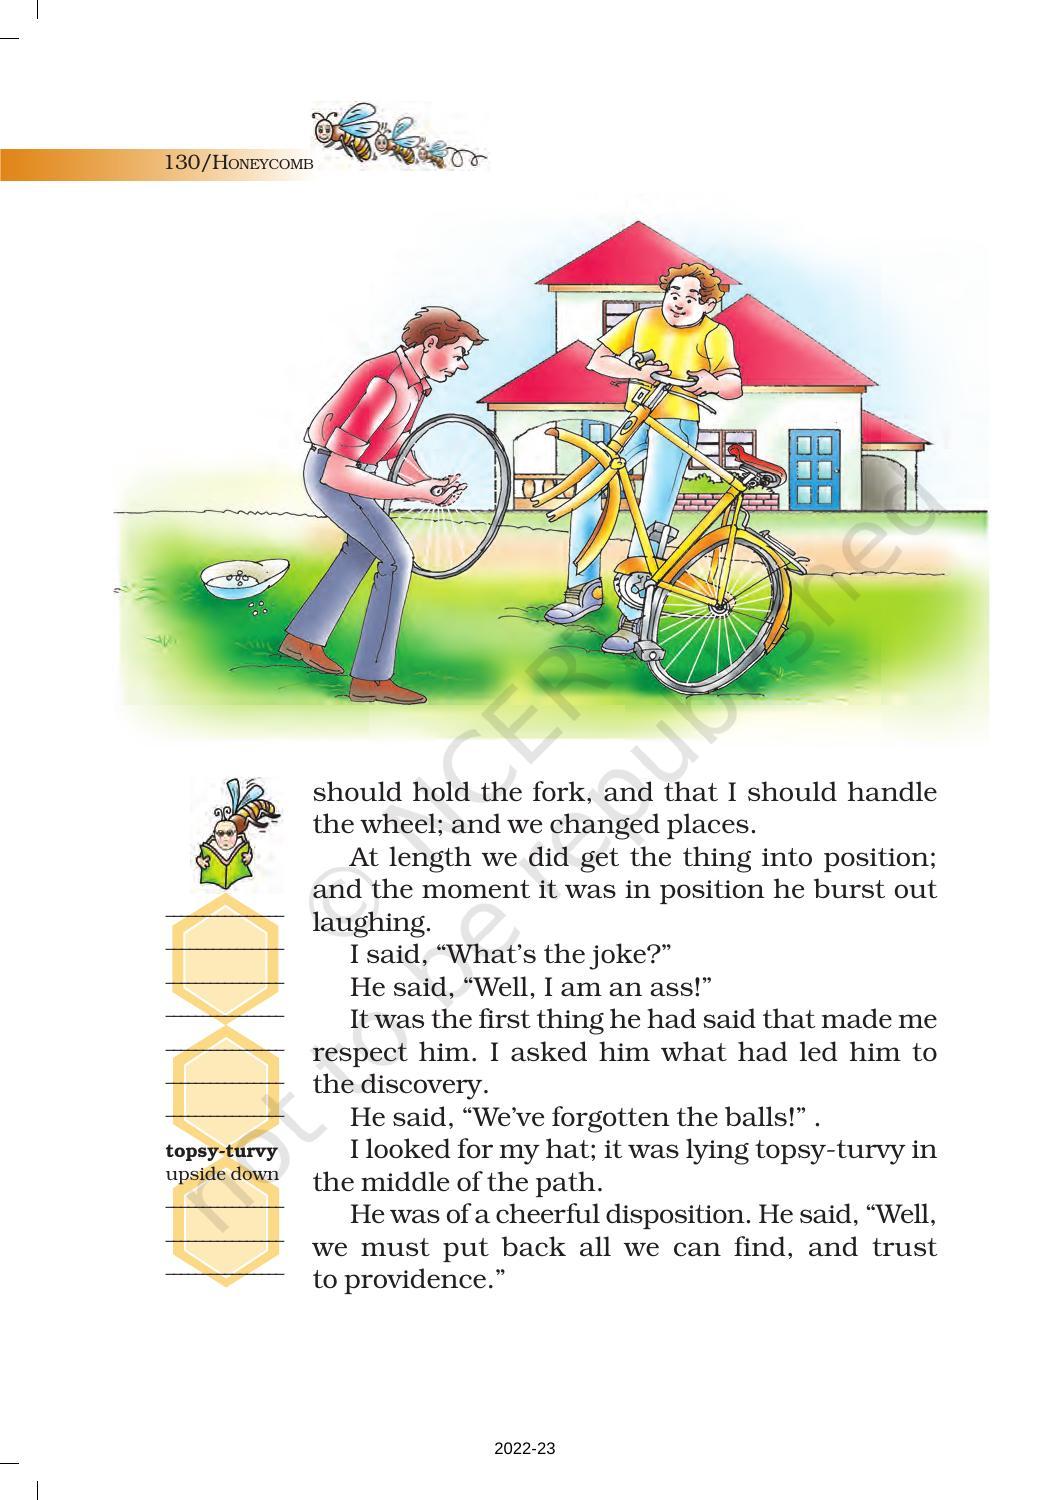 NCERT Book for Class 7 English (Honeycomb): Chapter 9-A Bicycle in Good Repair - Page 5